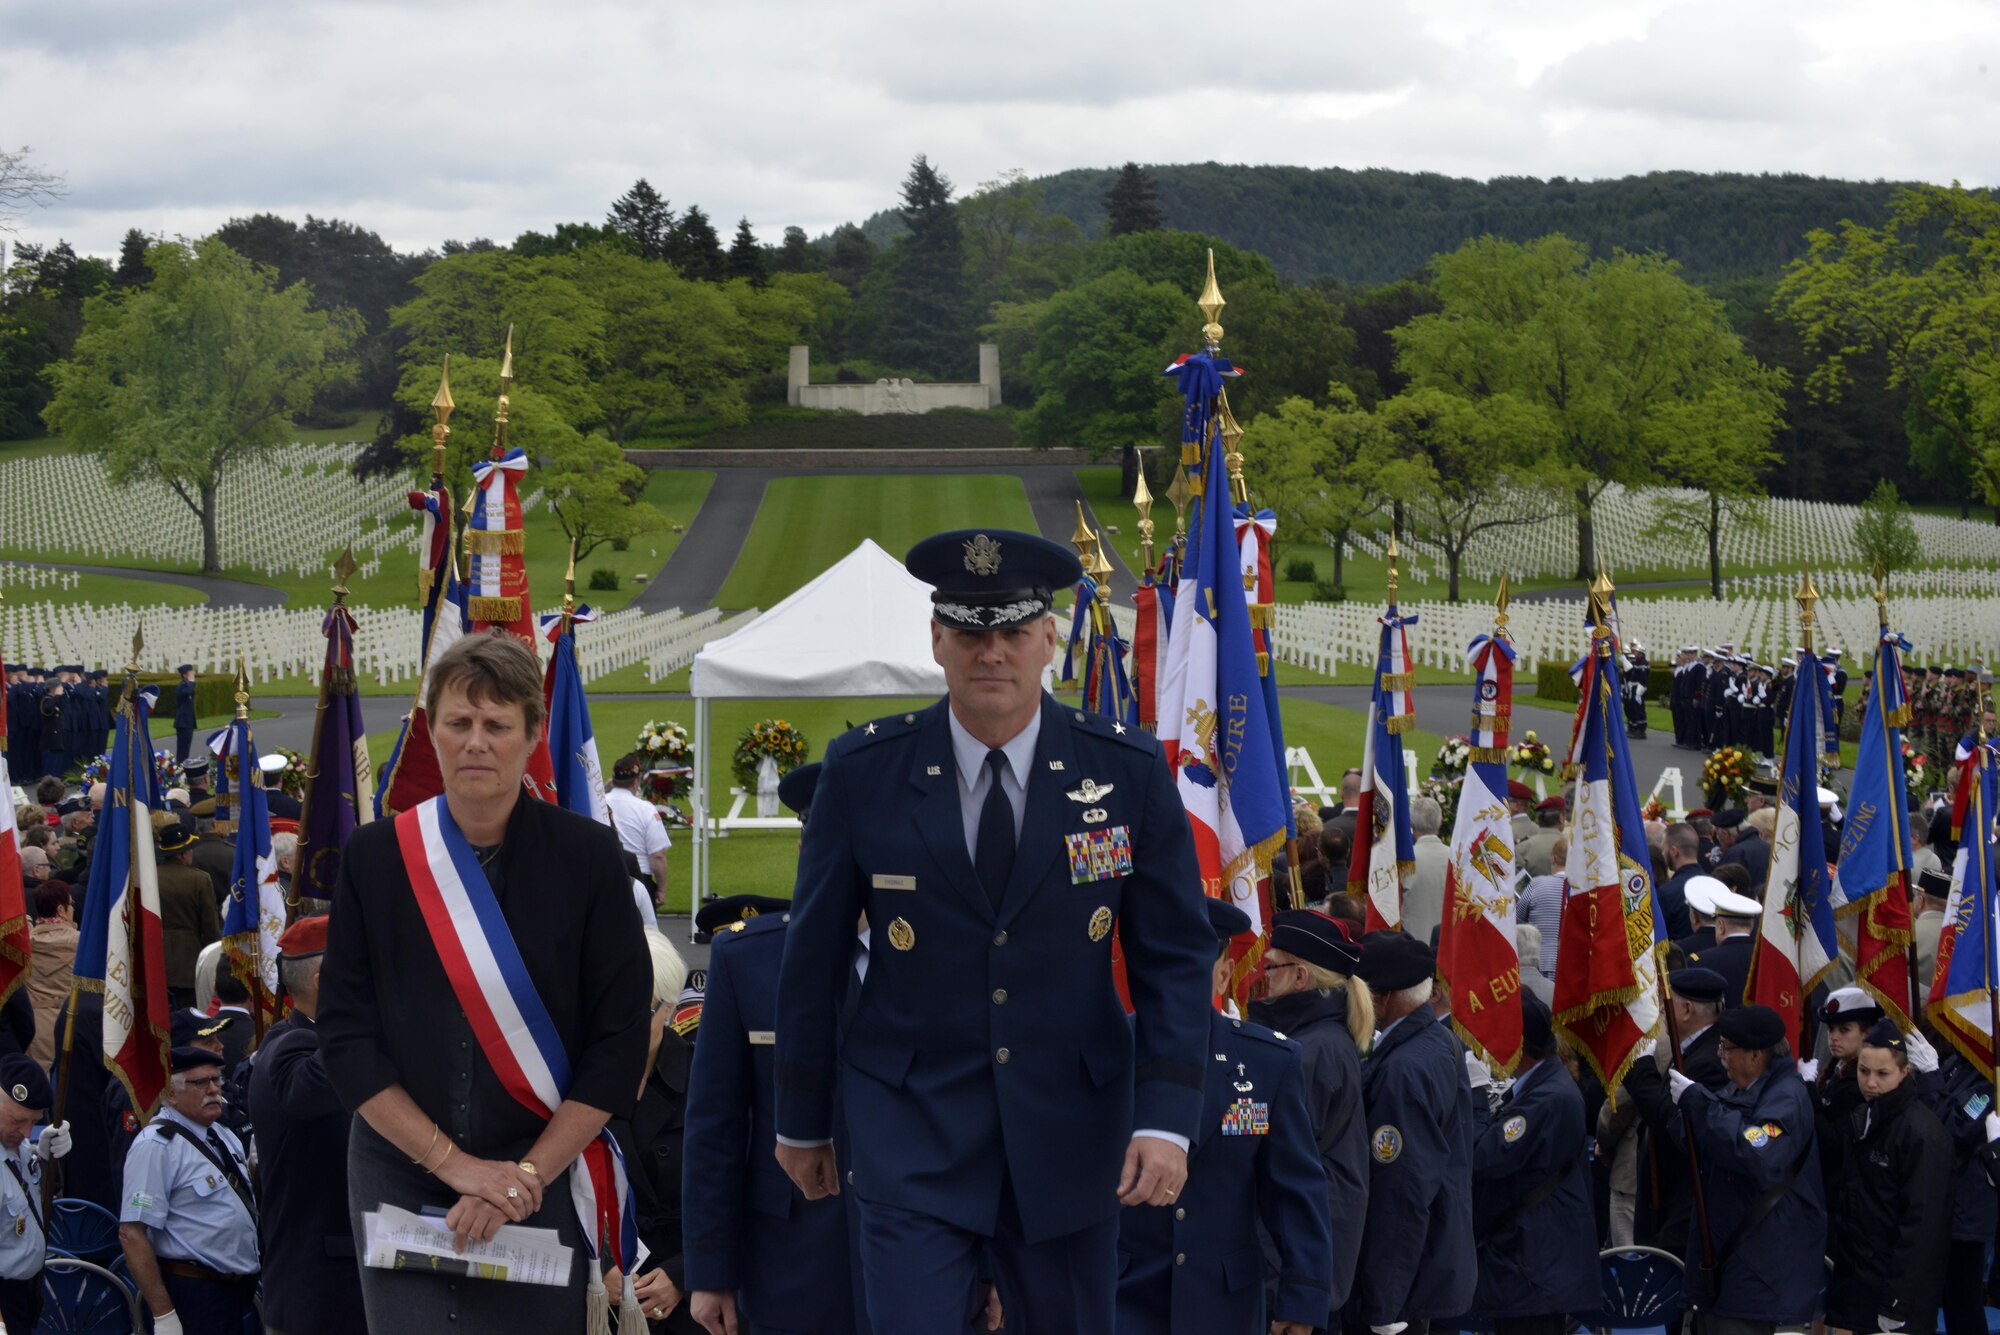 Brig. Gen. Jon Thomas, 86th Airlift Wing commander, departs Lorraine American Cemetery and Memorial, in St. Avold, France after a Memorial Day ceremony May 29, 2016. Memorial Day commemorates fallen servicemembers. (U.S. Air Force photo/Staff Sgt. Sharida Jackson)